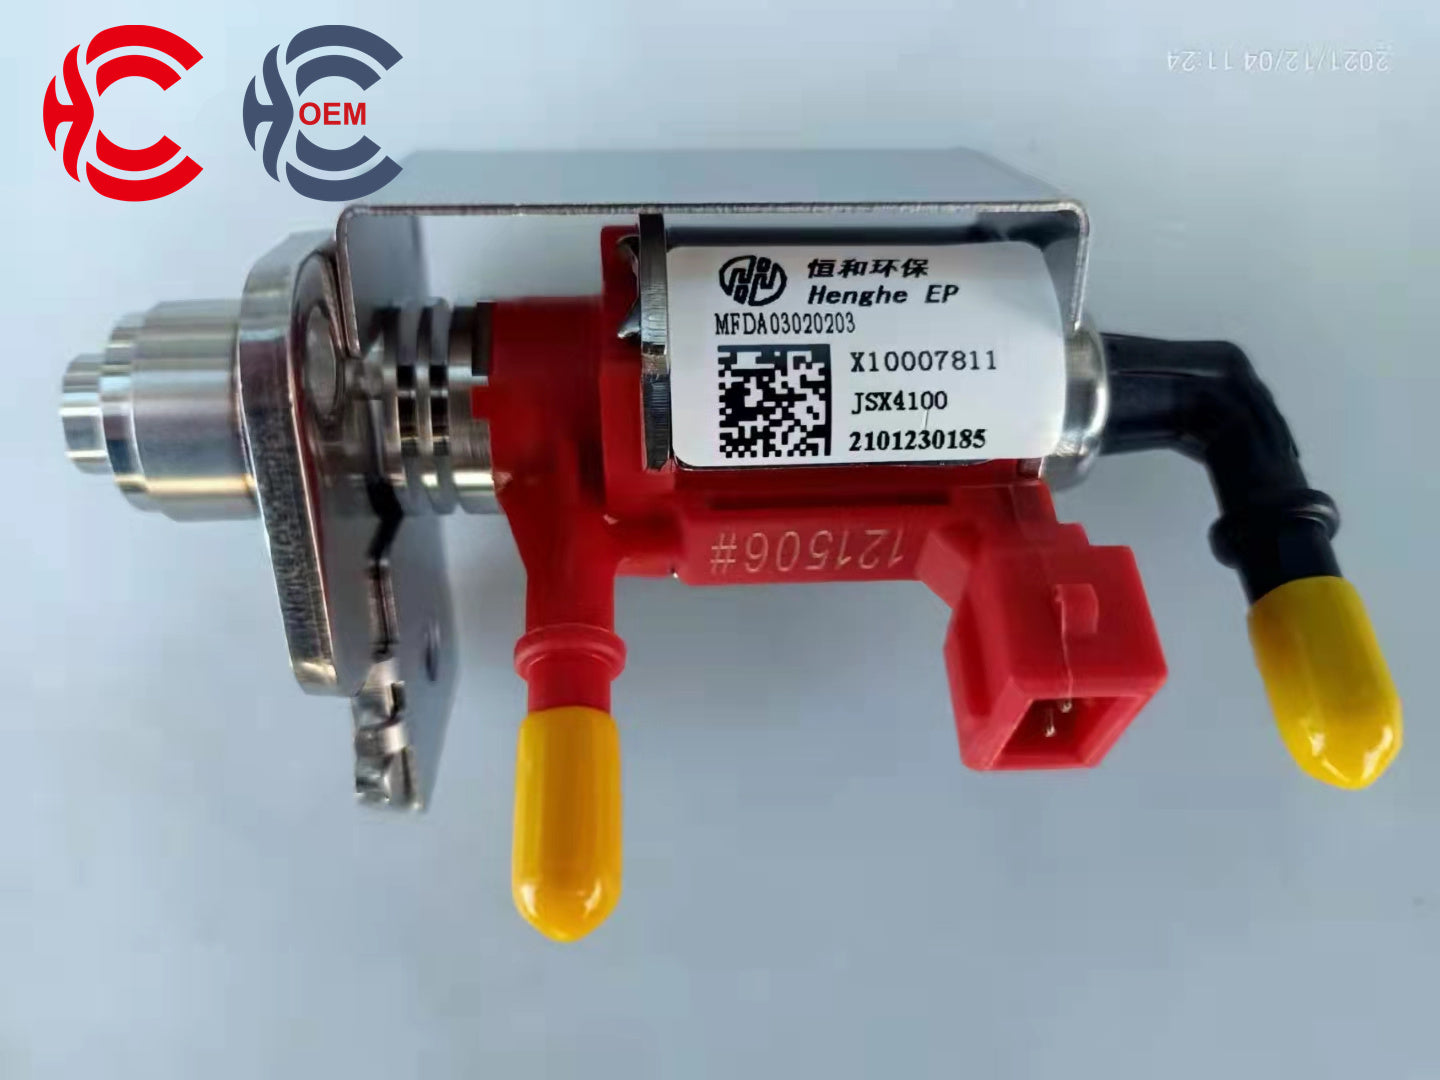 OEM: X10007811 HENGHE 12V ELECTRICMaterial: MetalColor: SilverOrigin: Made in ChinaWeight: 400gPacking List: 1* Adblue/Urea Nozzle More ServiceWe can provide OEM Manufacturing serviceWe can Be your one-step solution for Auto PartsWe can provide technical scheme for you Feel Free to Contact Us, We will get back to you as soon as possible.